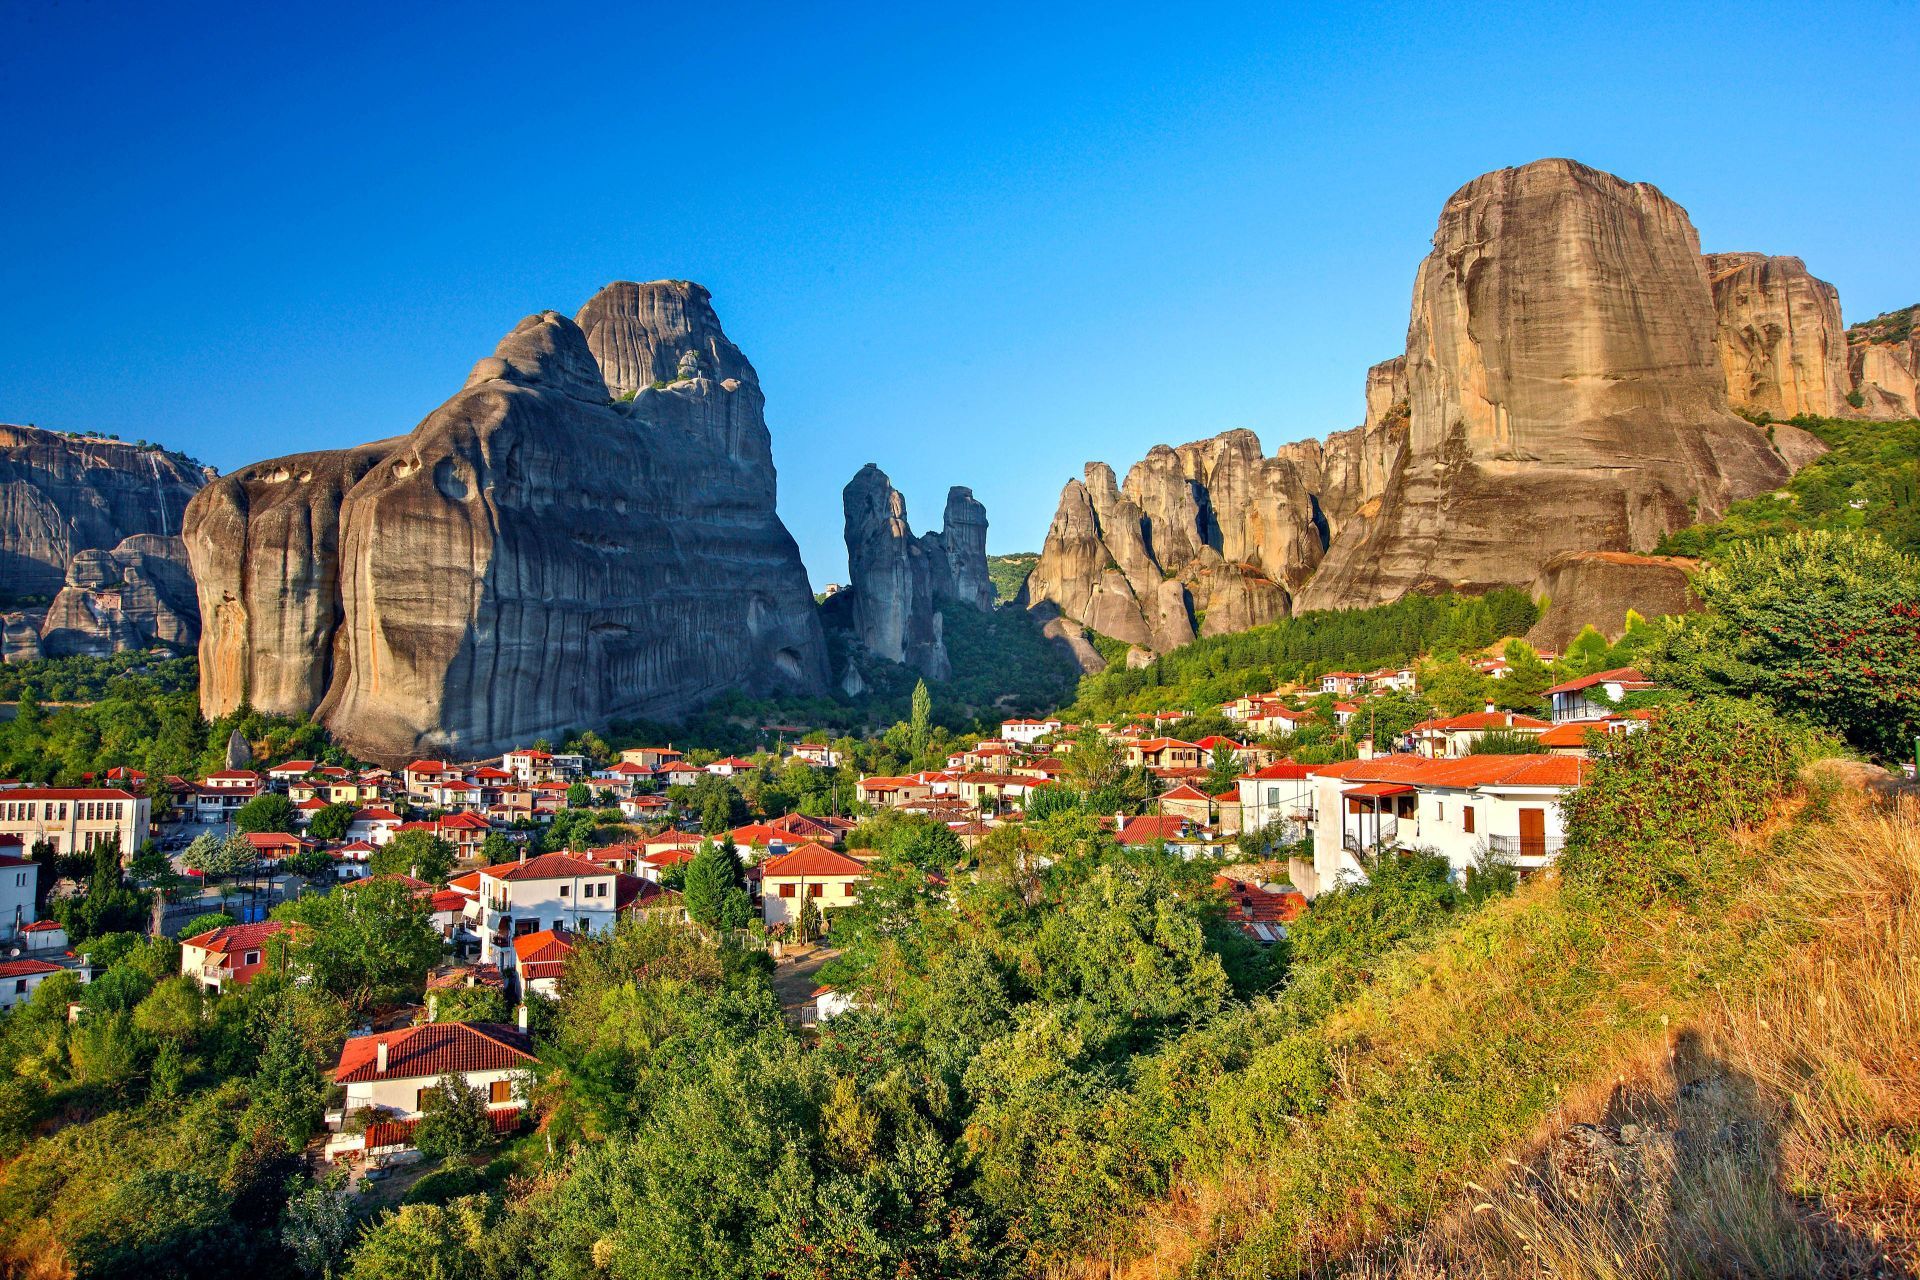 The village of Kastraki and its rock formations